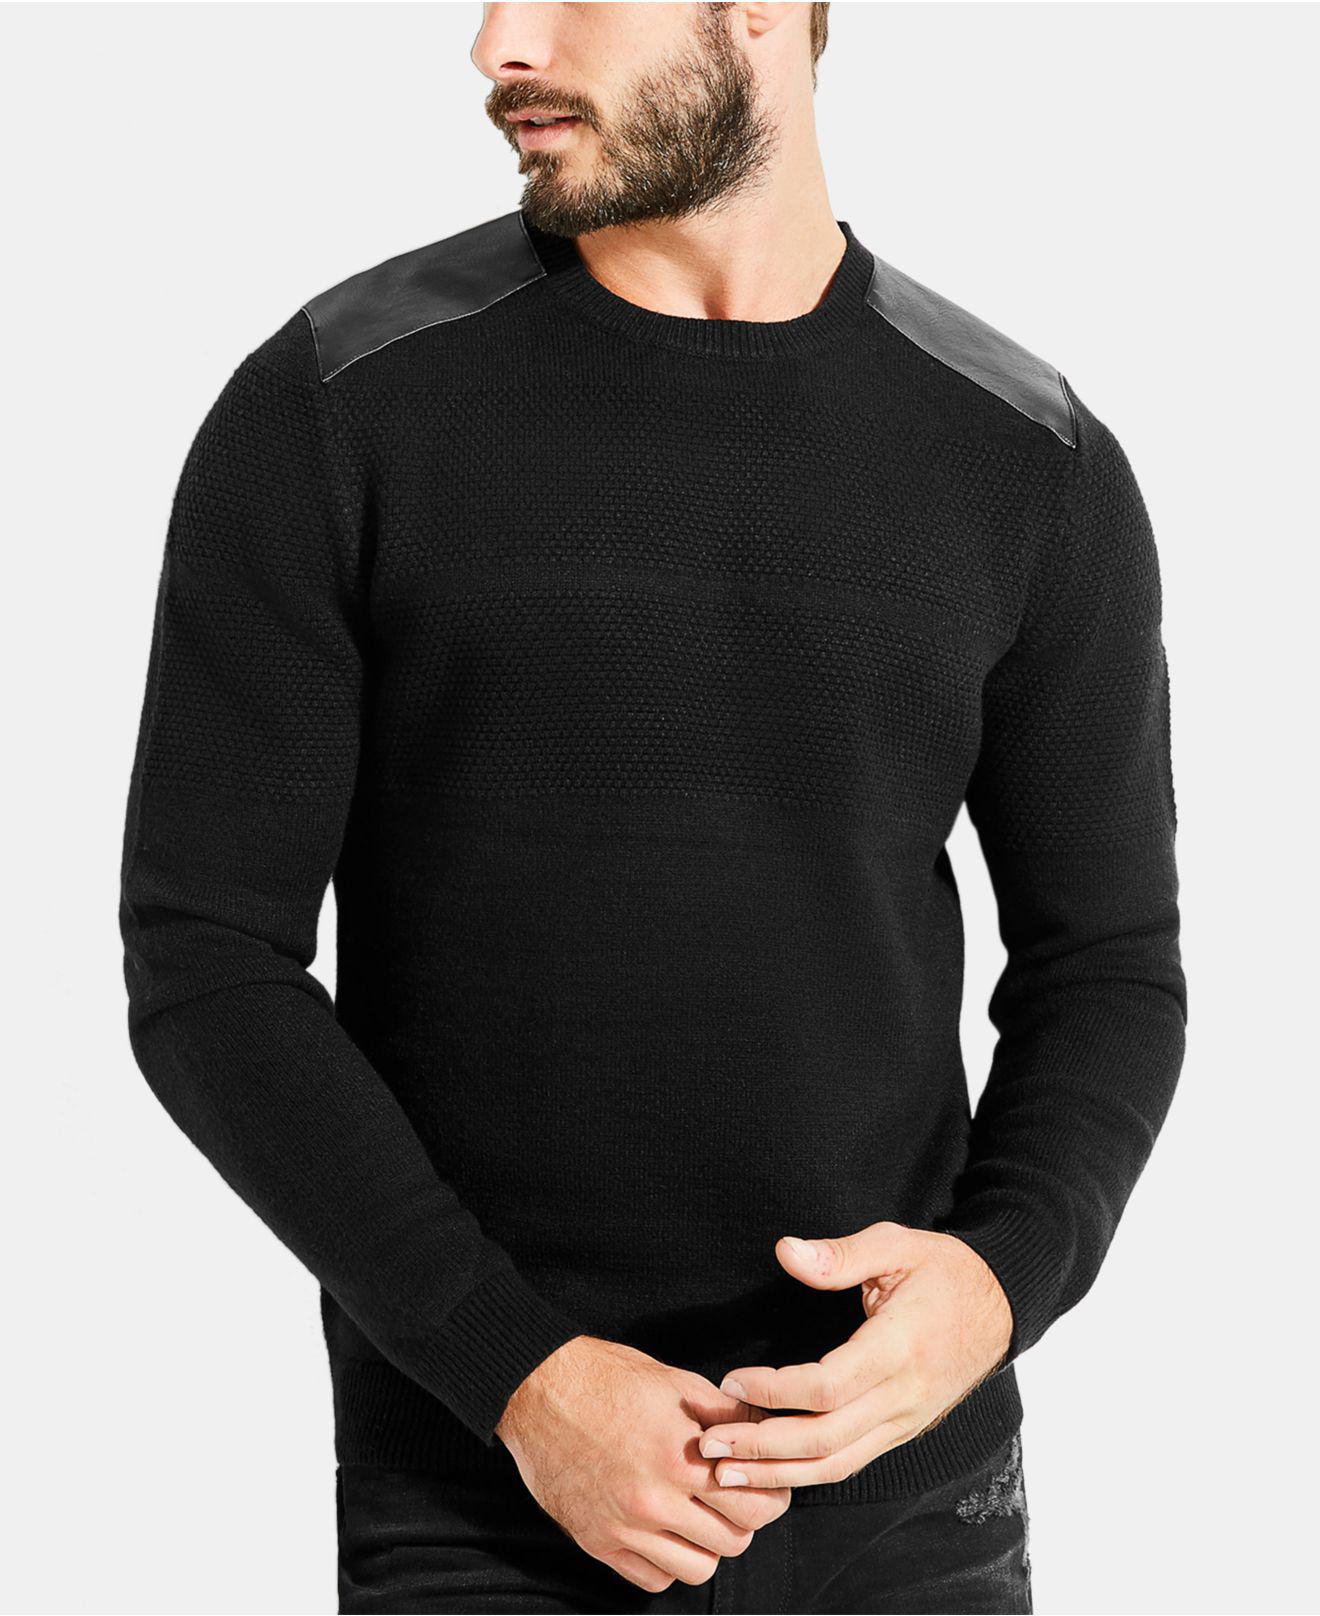 Lyst - Guess Waffle Knit Shoulder Patch Sweater in Black for Men